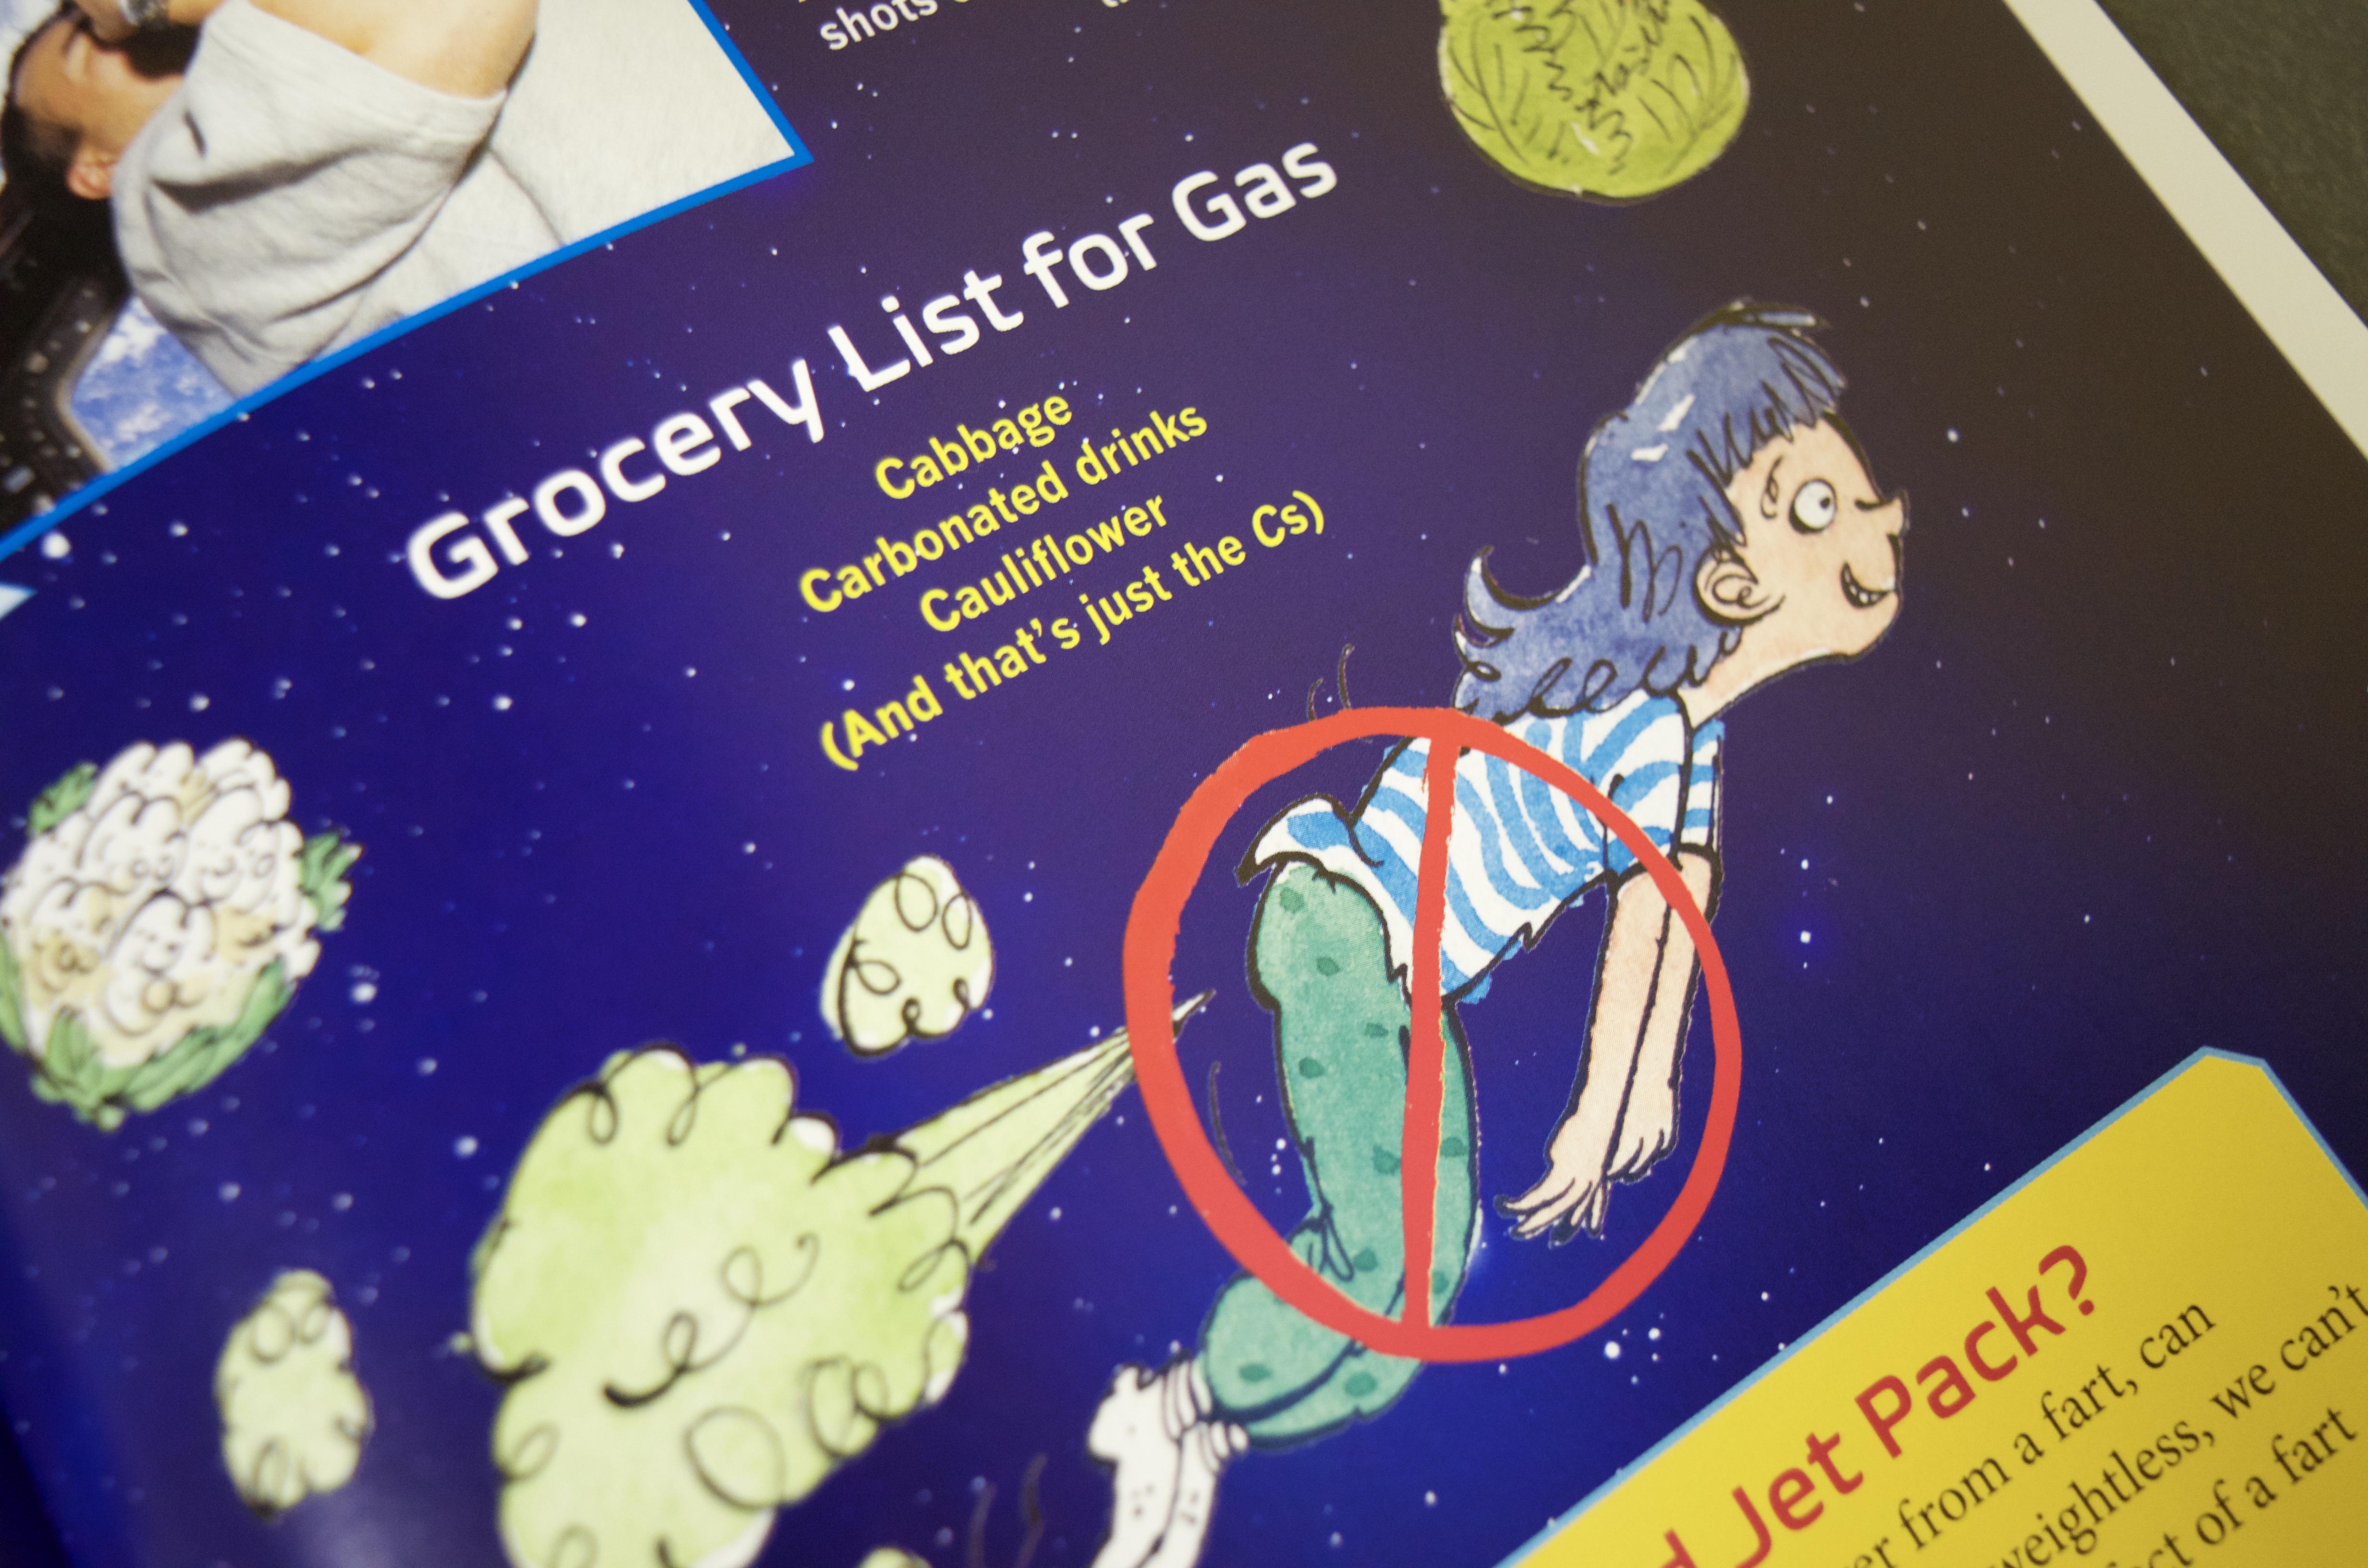 To Burp or Not to Burp - a children's book in space written by a NASA astronaut